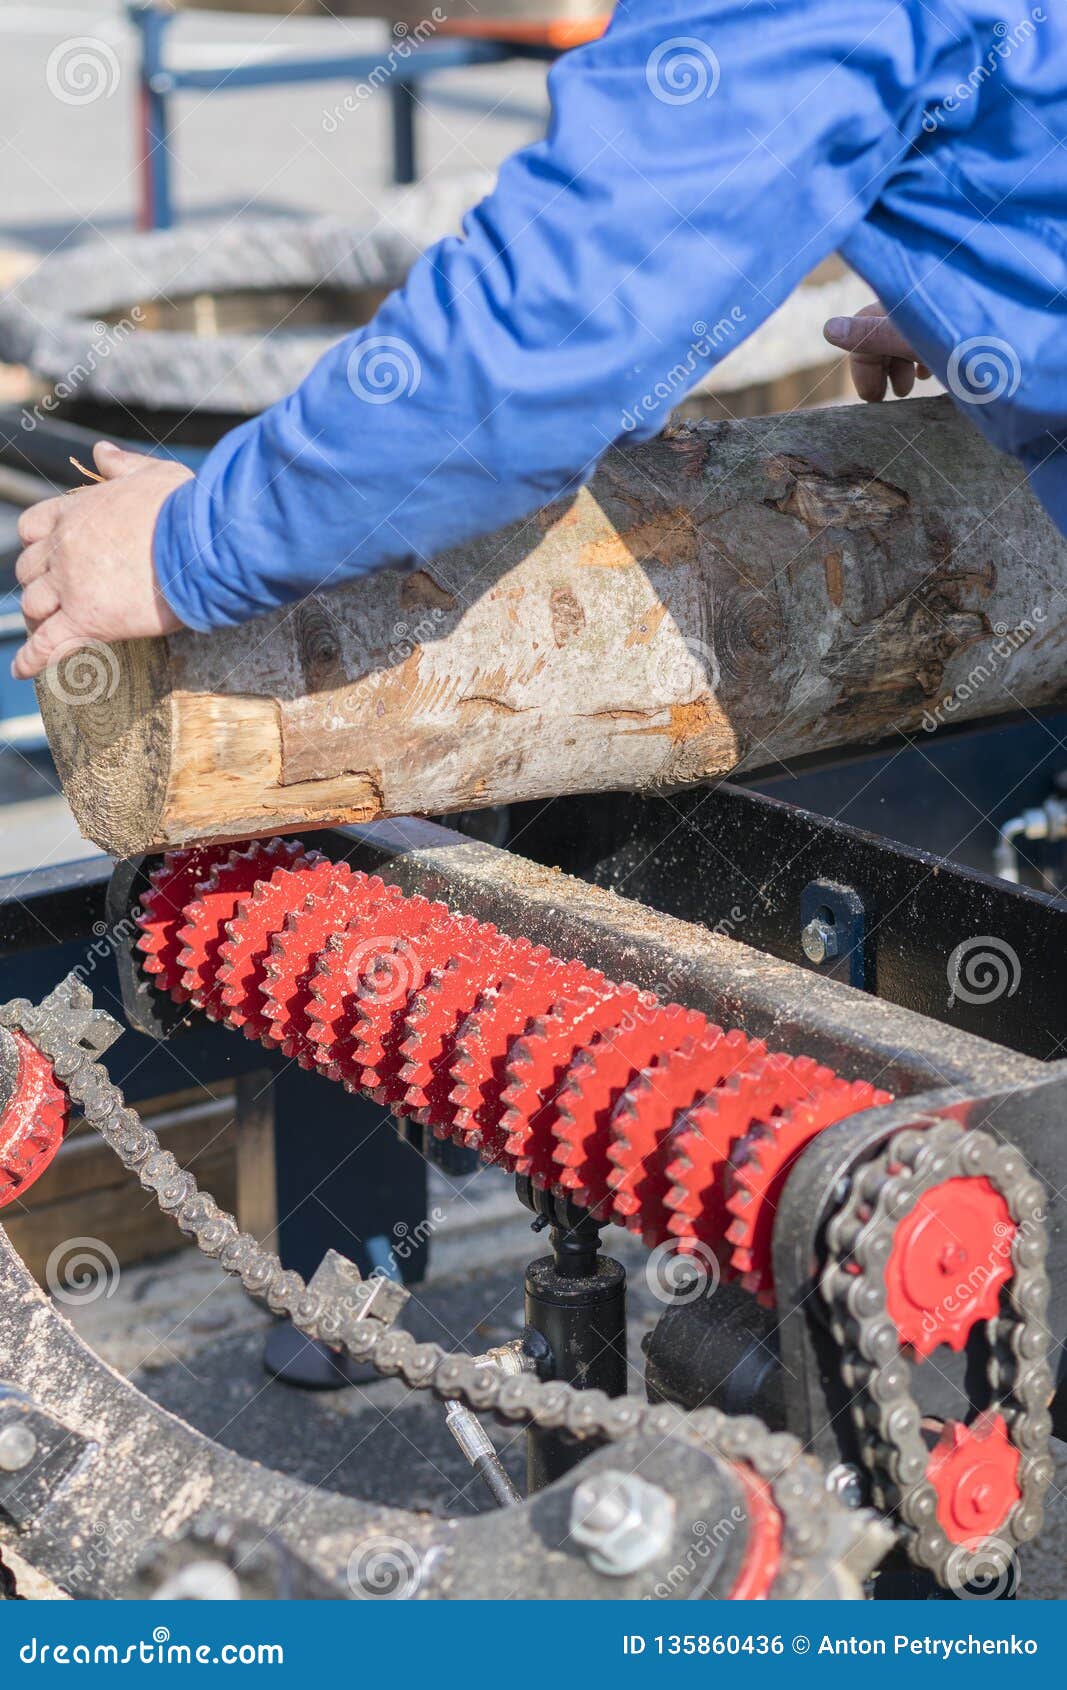 worker works at a woodworking enterprise. wood industry. vertical photo